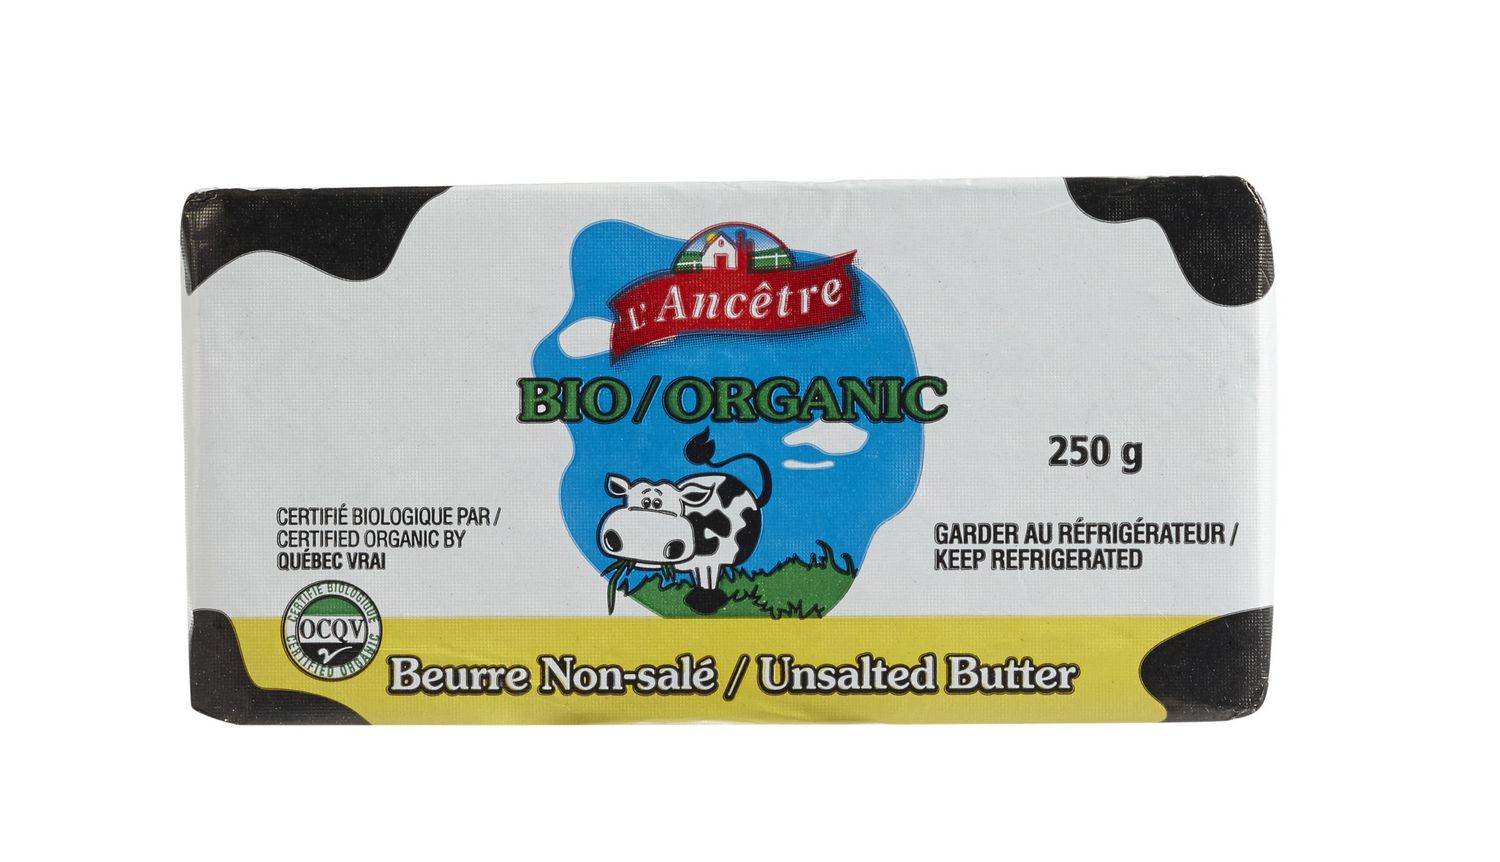 Cheese and butter – Tagged 03-Beurre et margarine– Epipresto